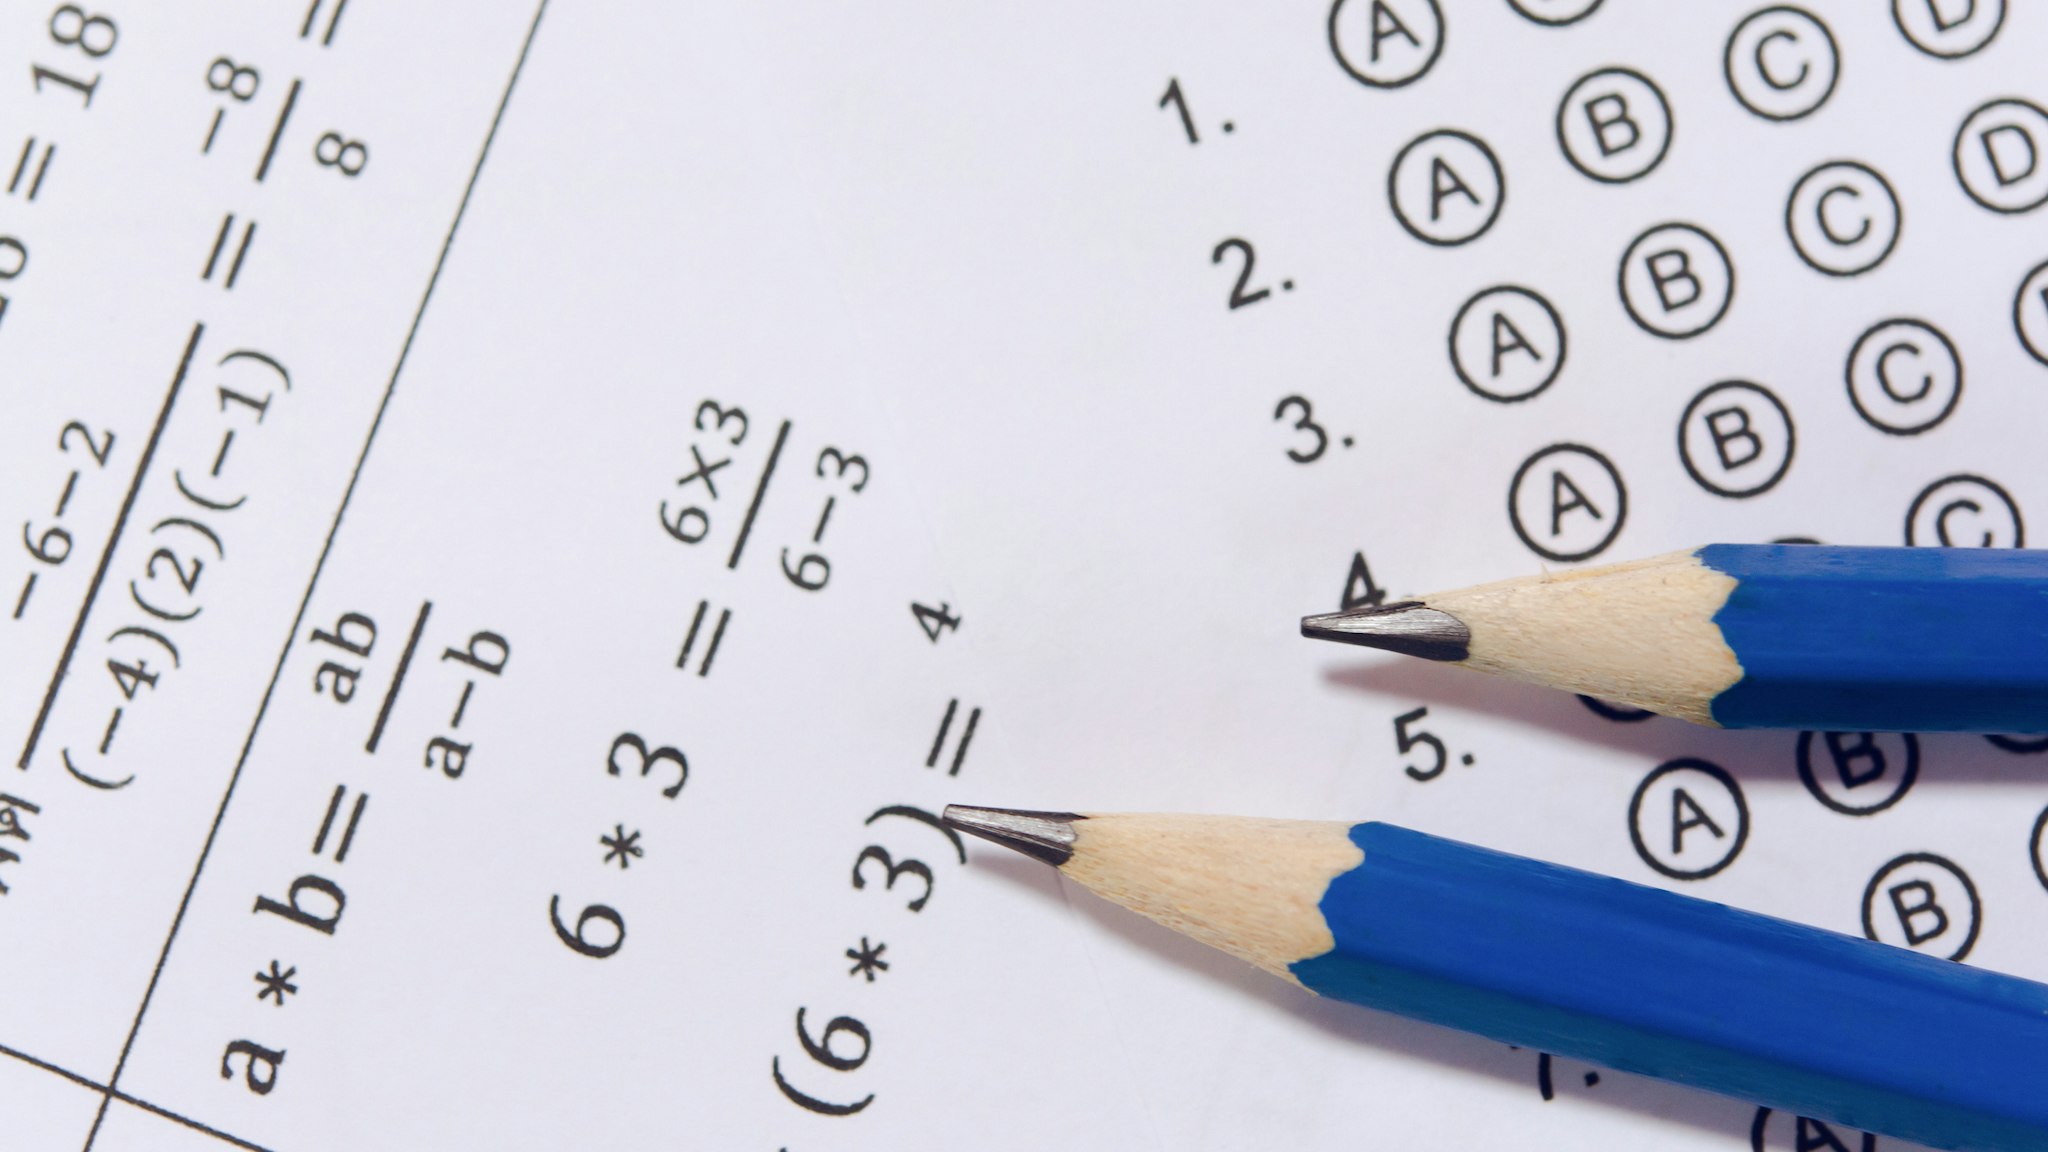 Pencil on answer sheets or Standardized test form with answers bubbled. multiple choice answer sheet - stock photo